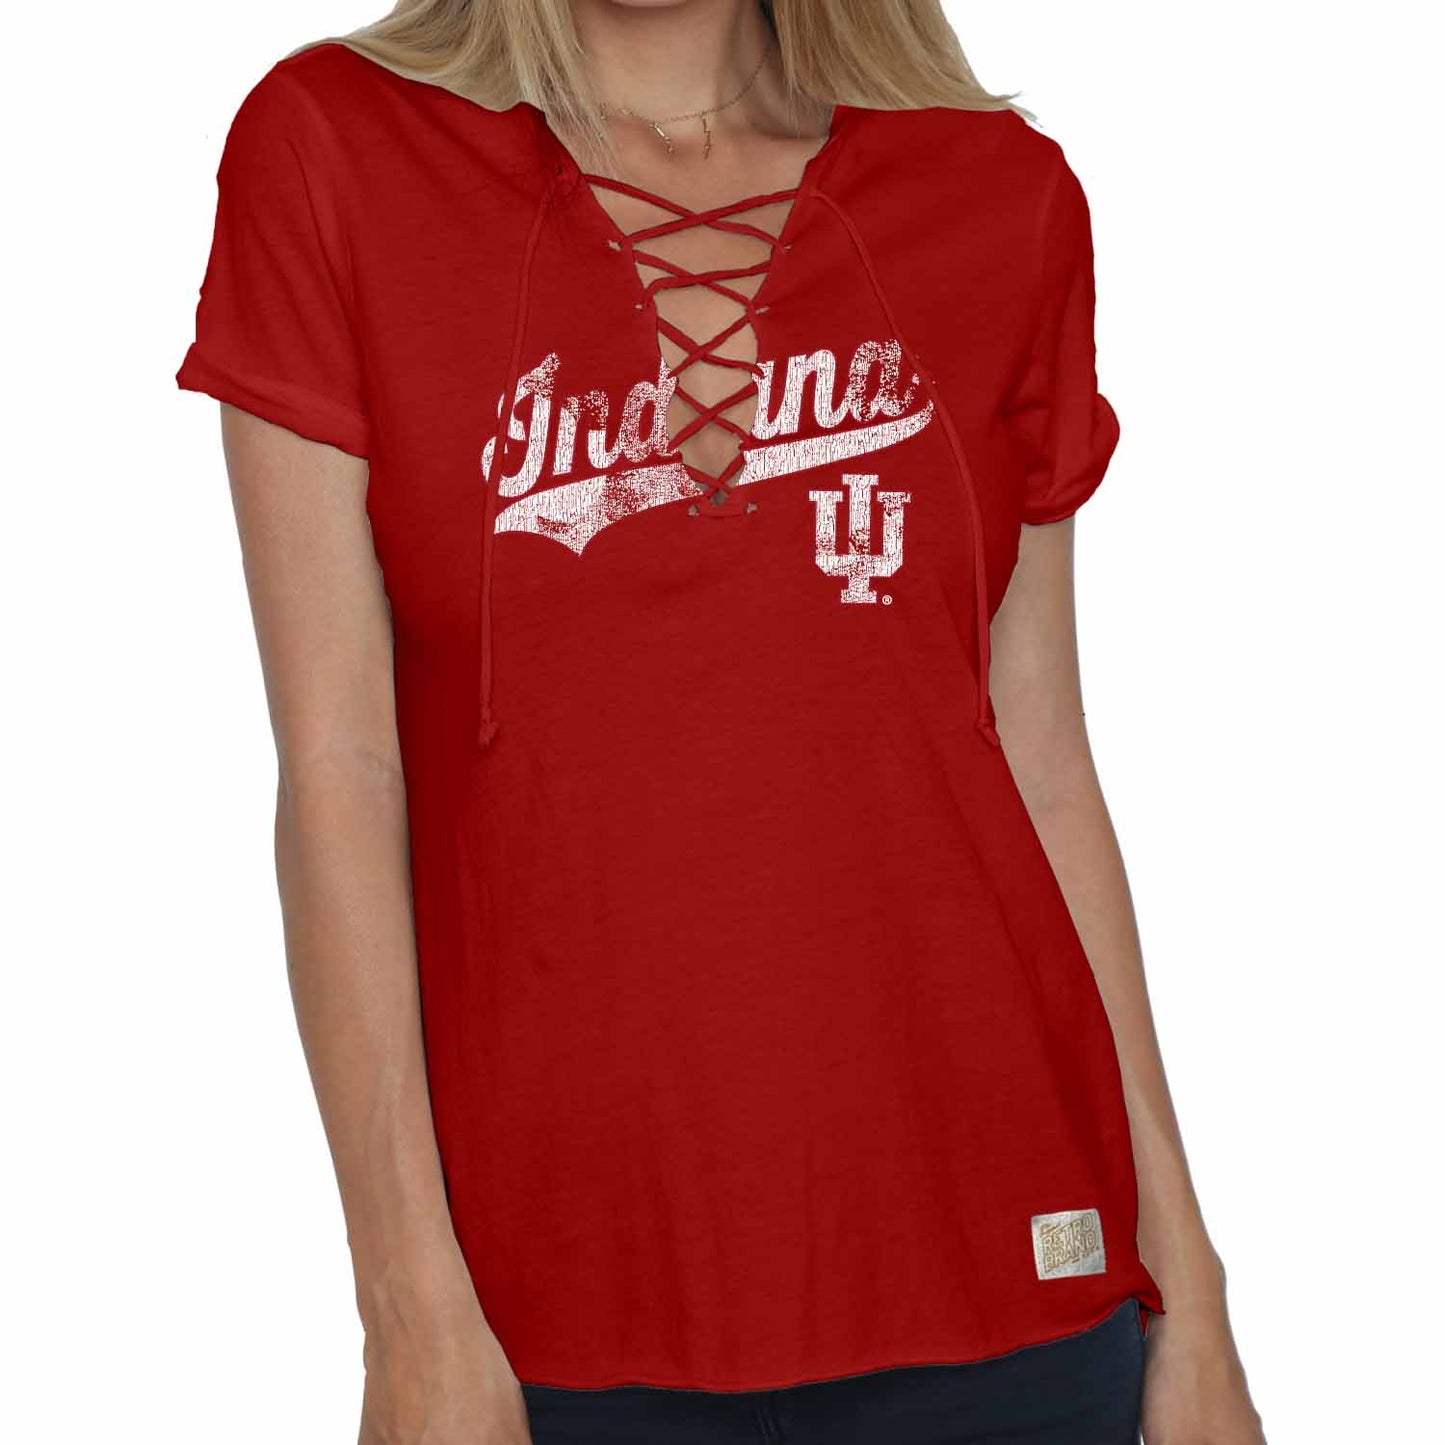 Indiana Hoosiers  Womens Vintage Lace Up Shirt  - Cardinal